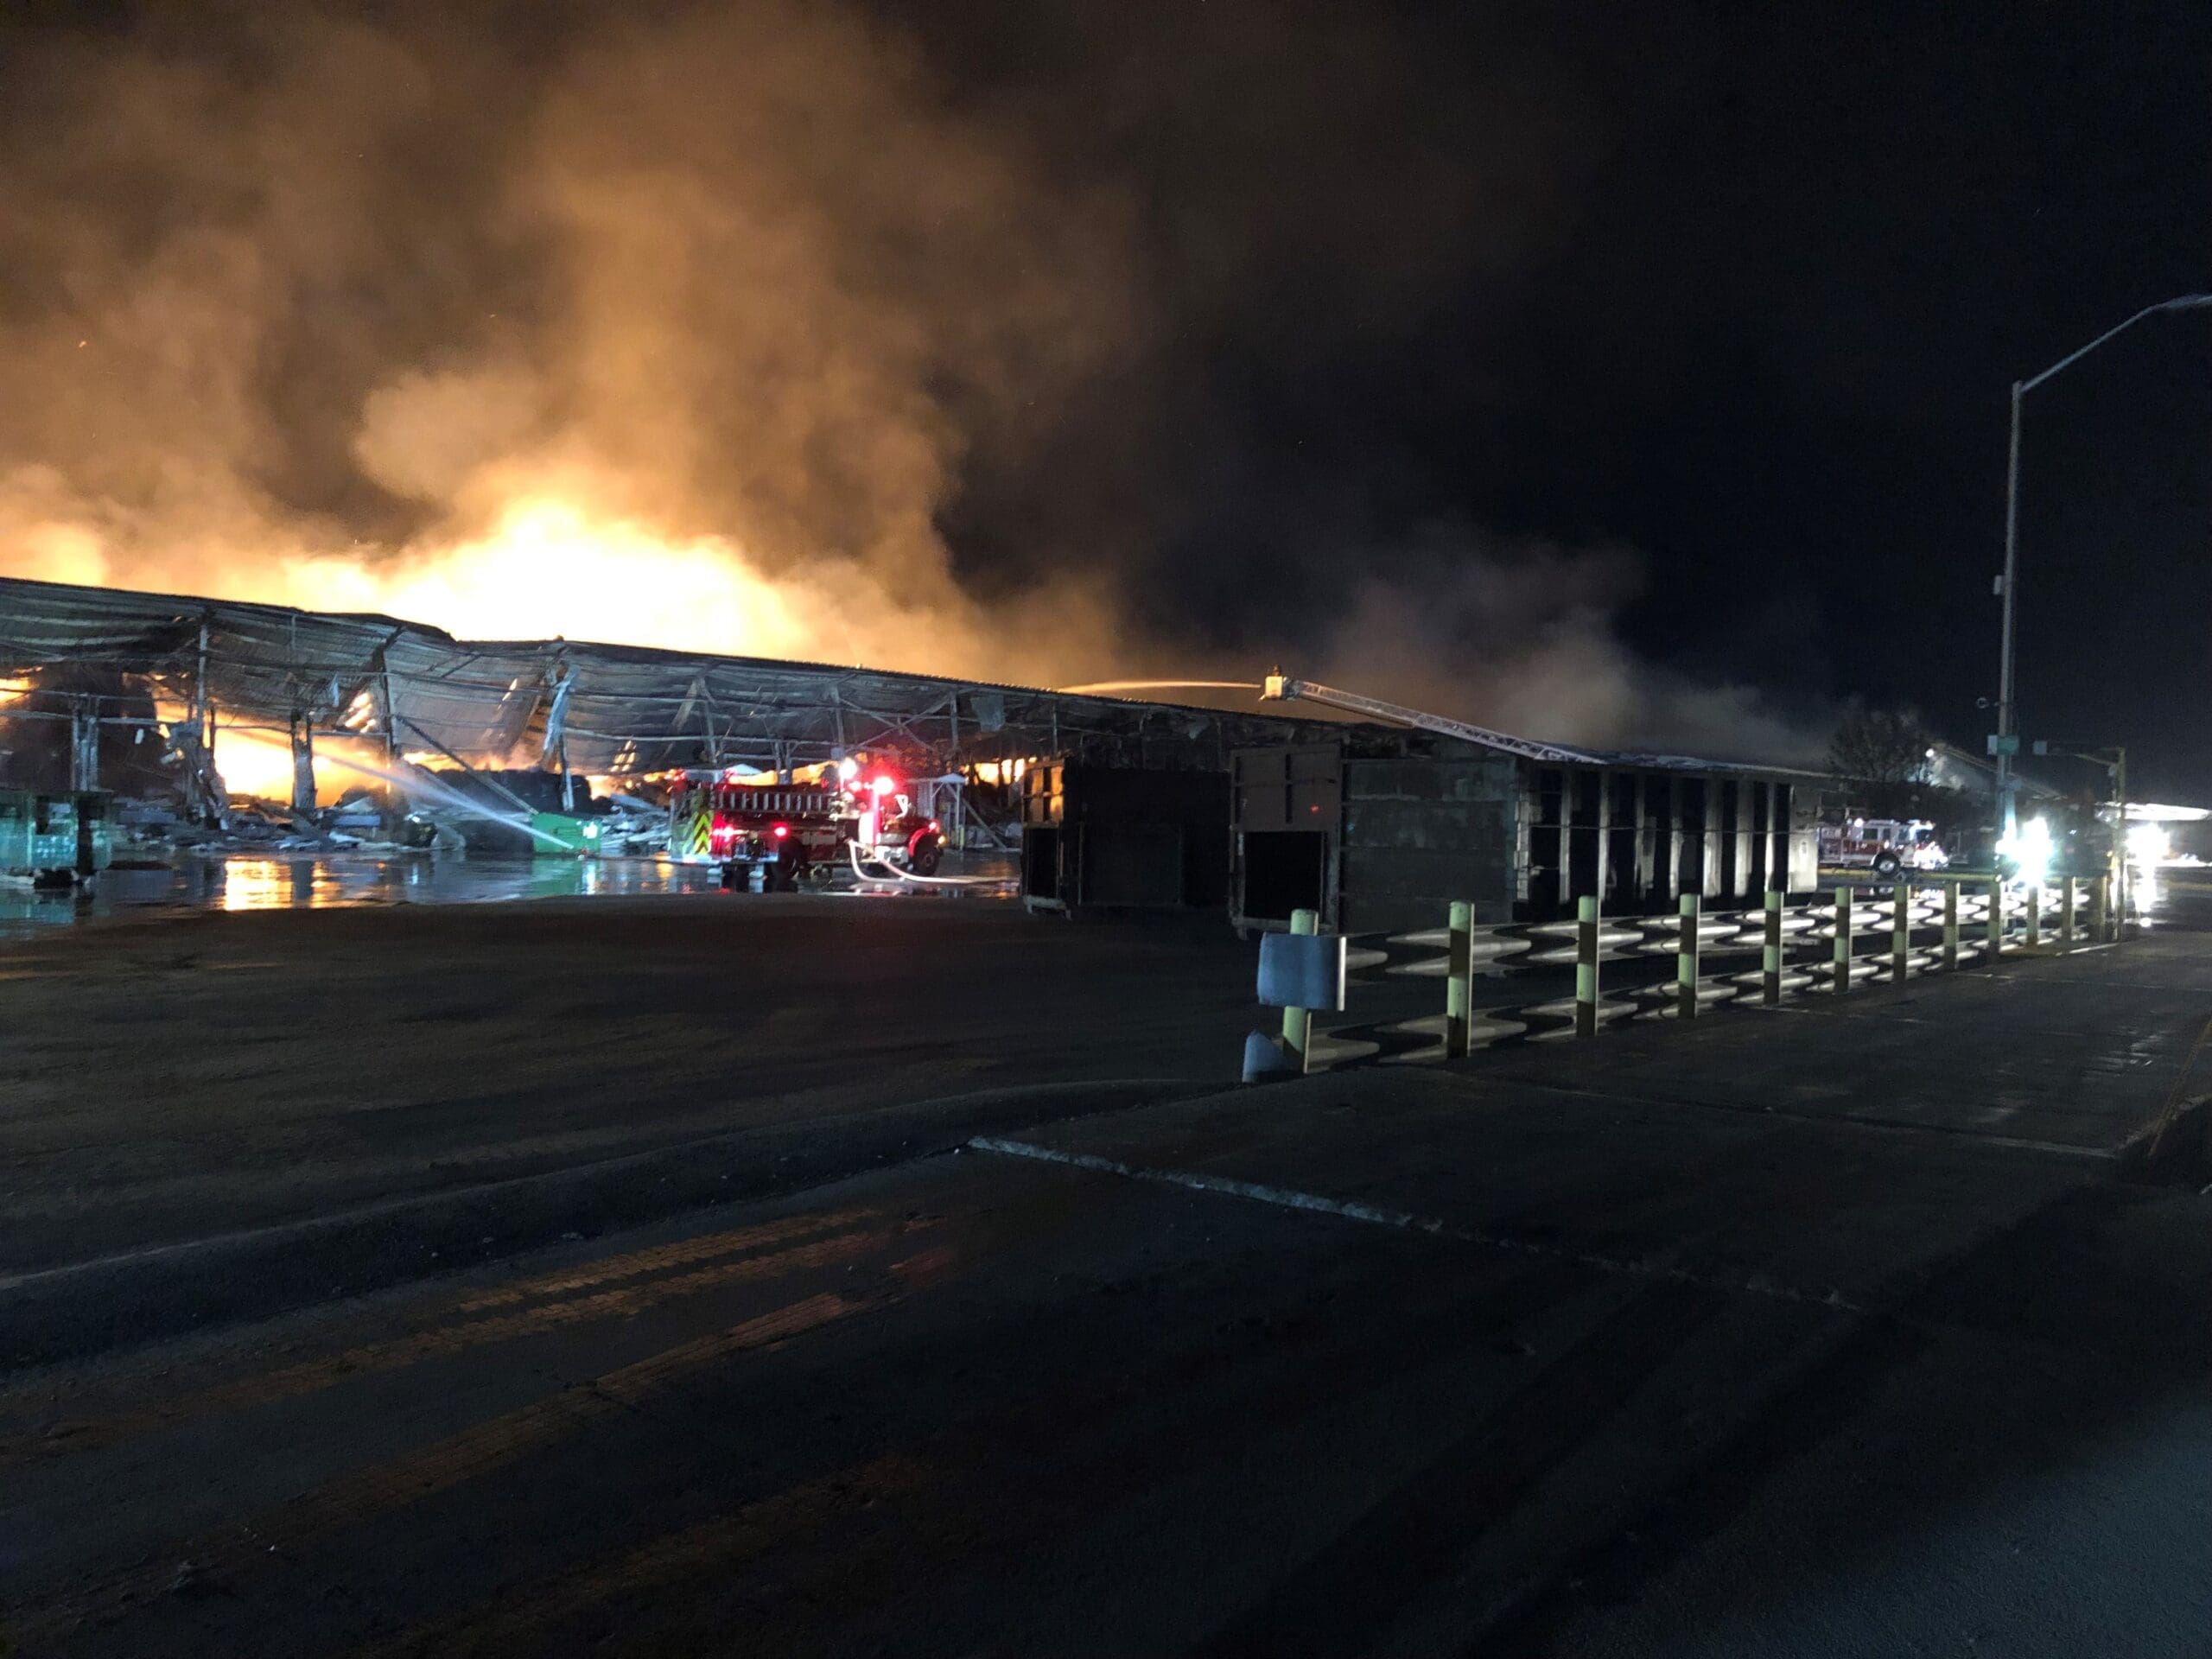 Large structure on fire at night